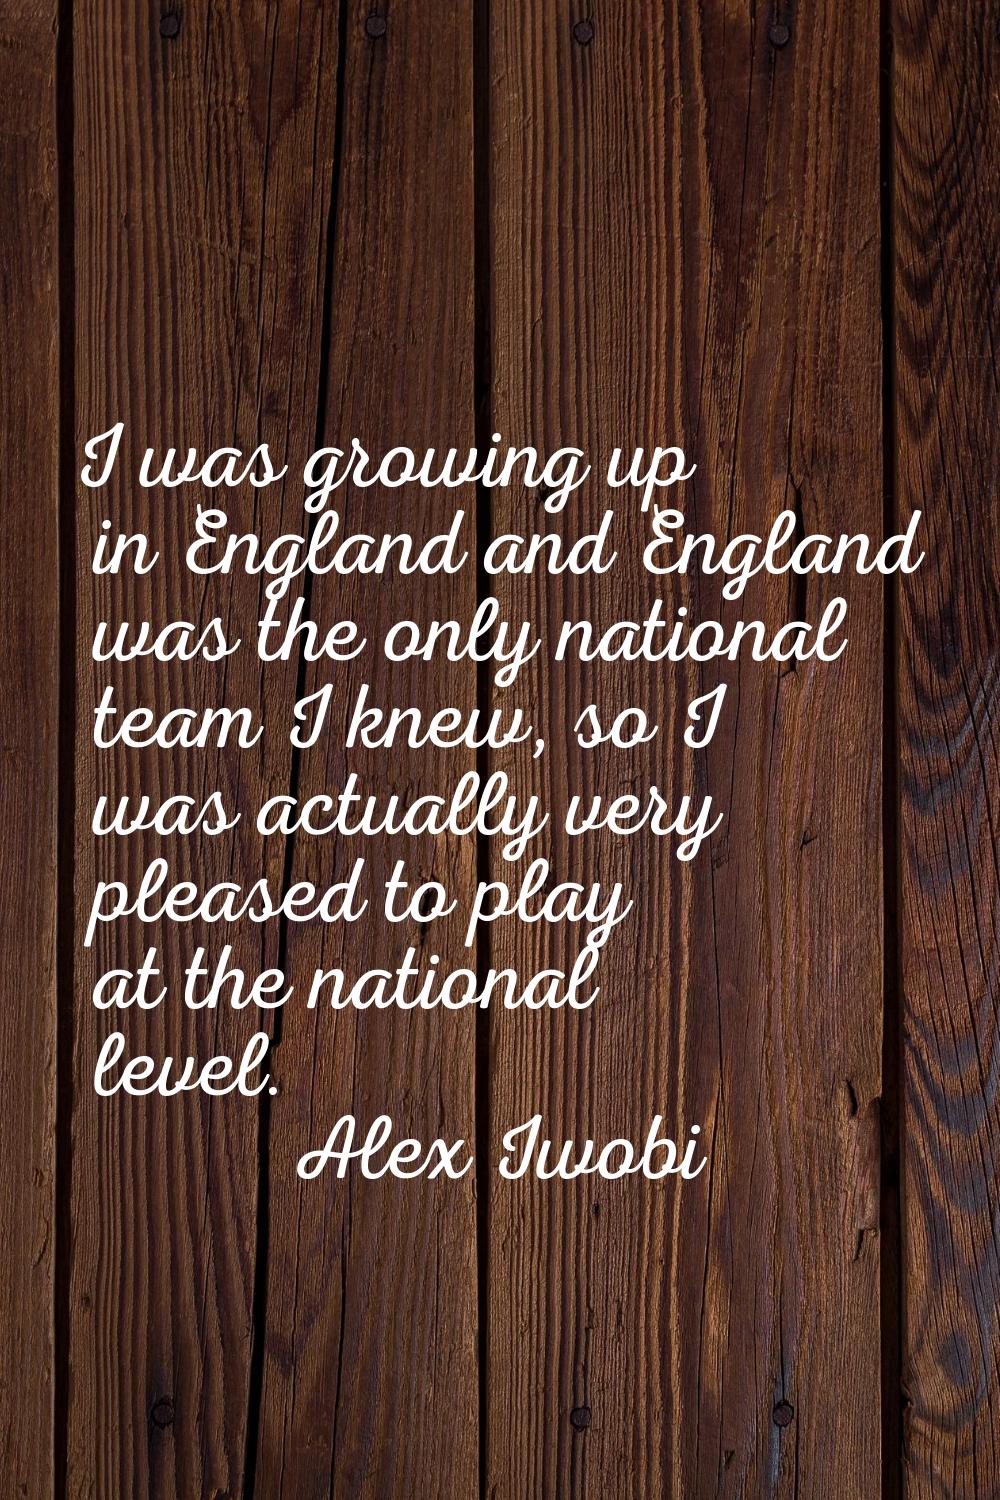 I was growing up in England and England was the only national team I knew, so I was actually very p